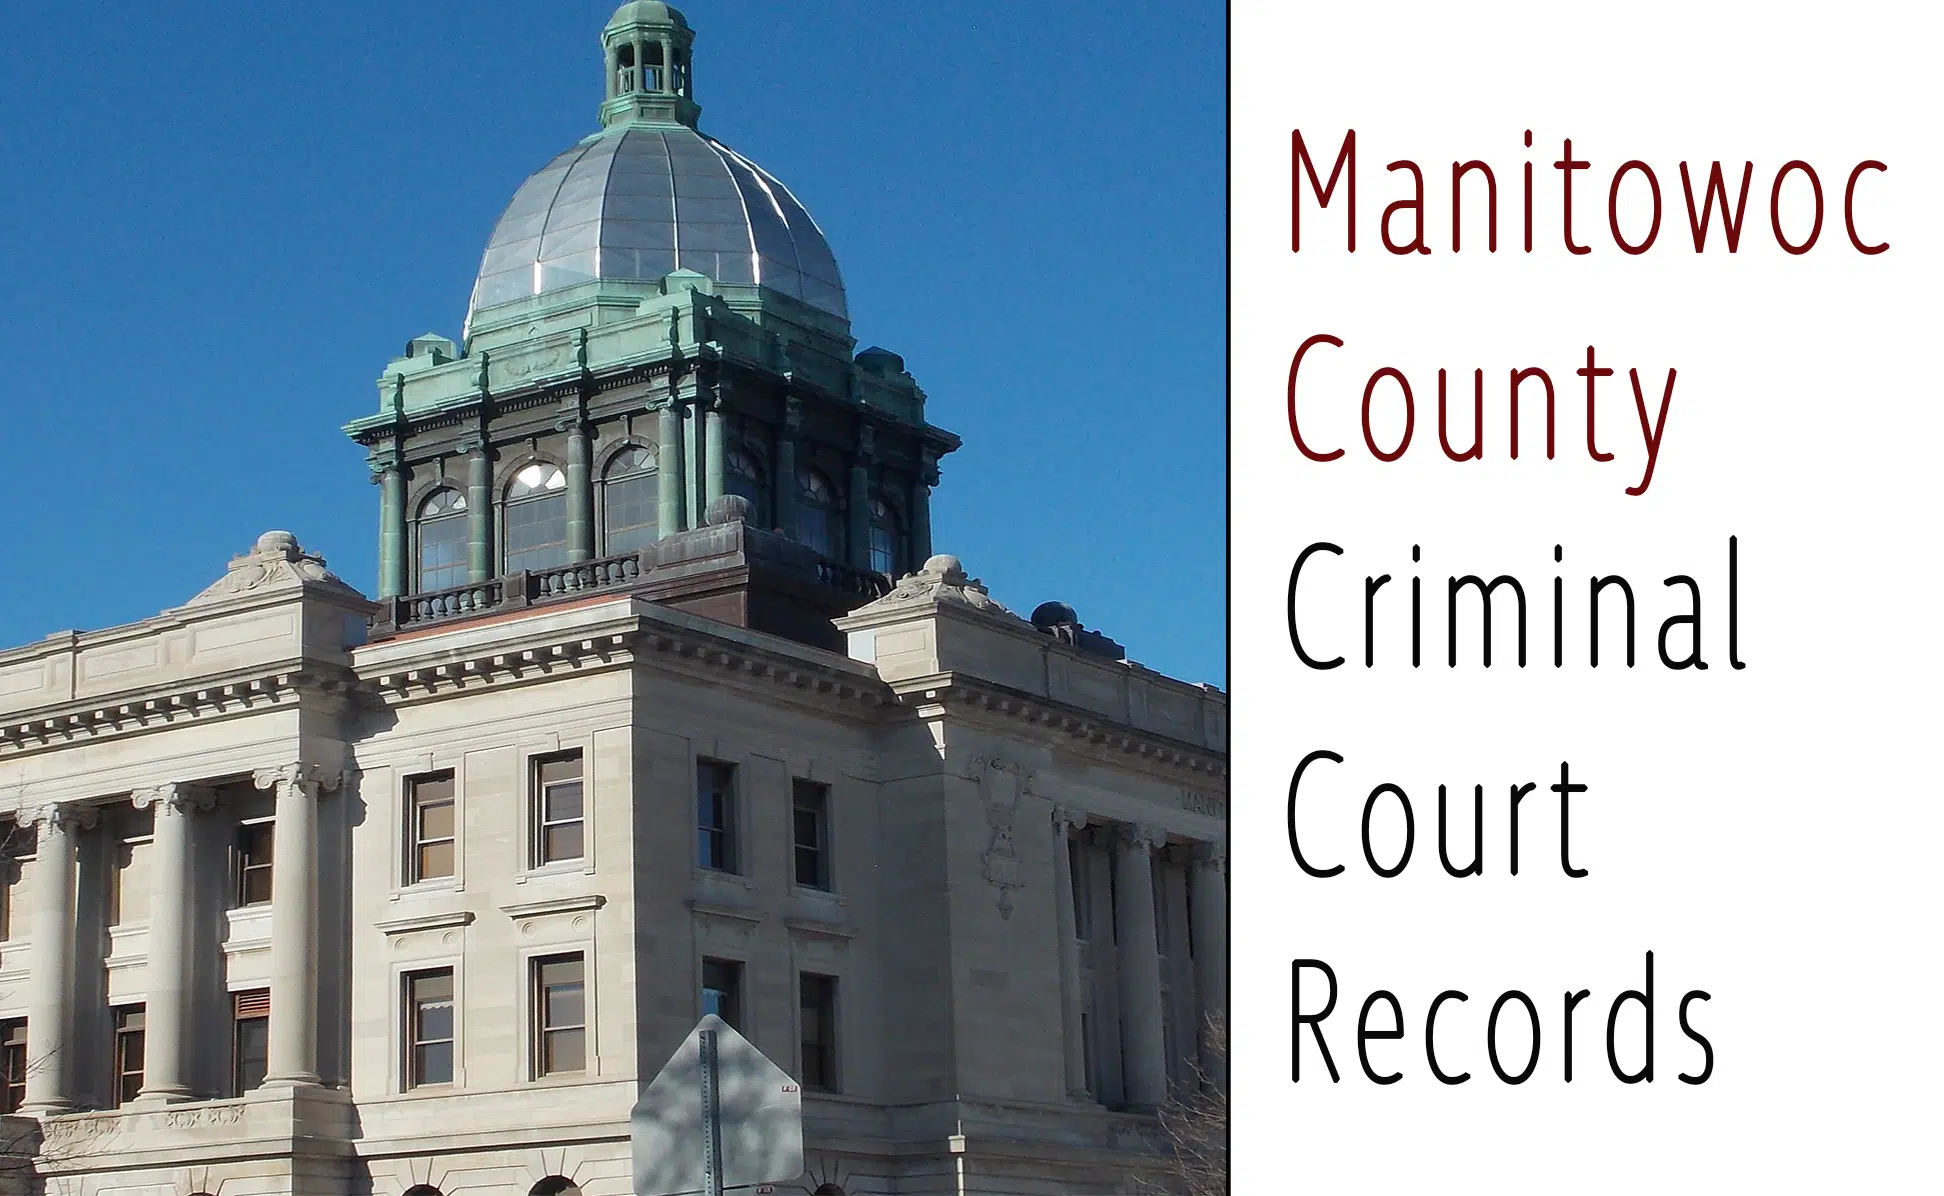 Manitowoc County Criminal Court Records